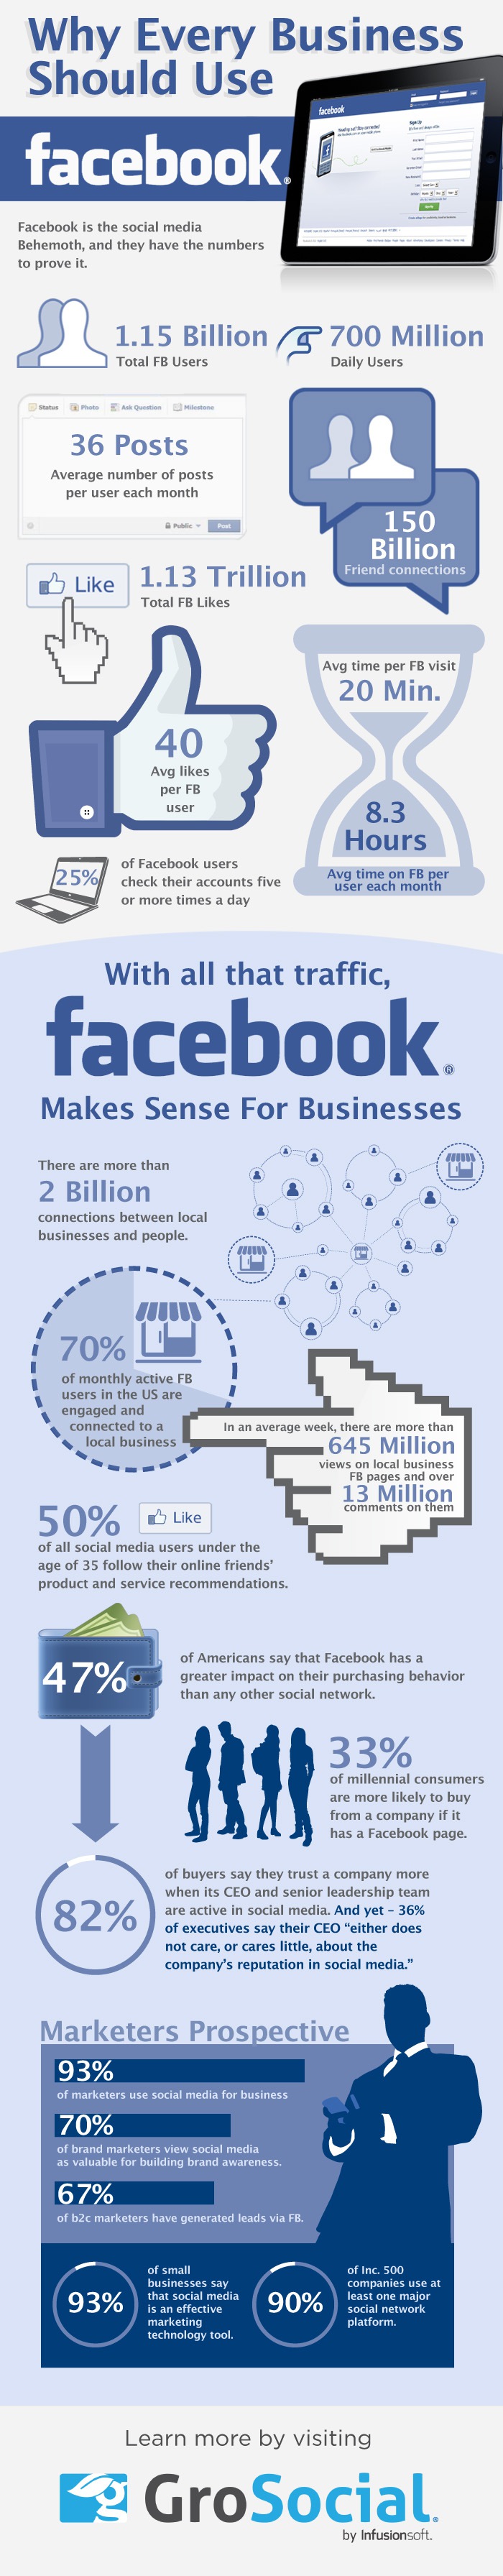 Why Every Business Should Use Facebook